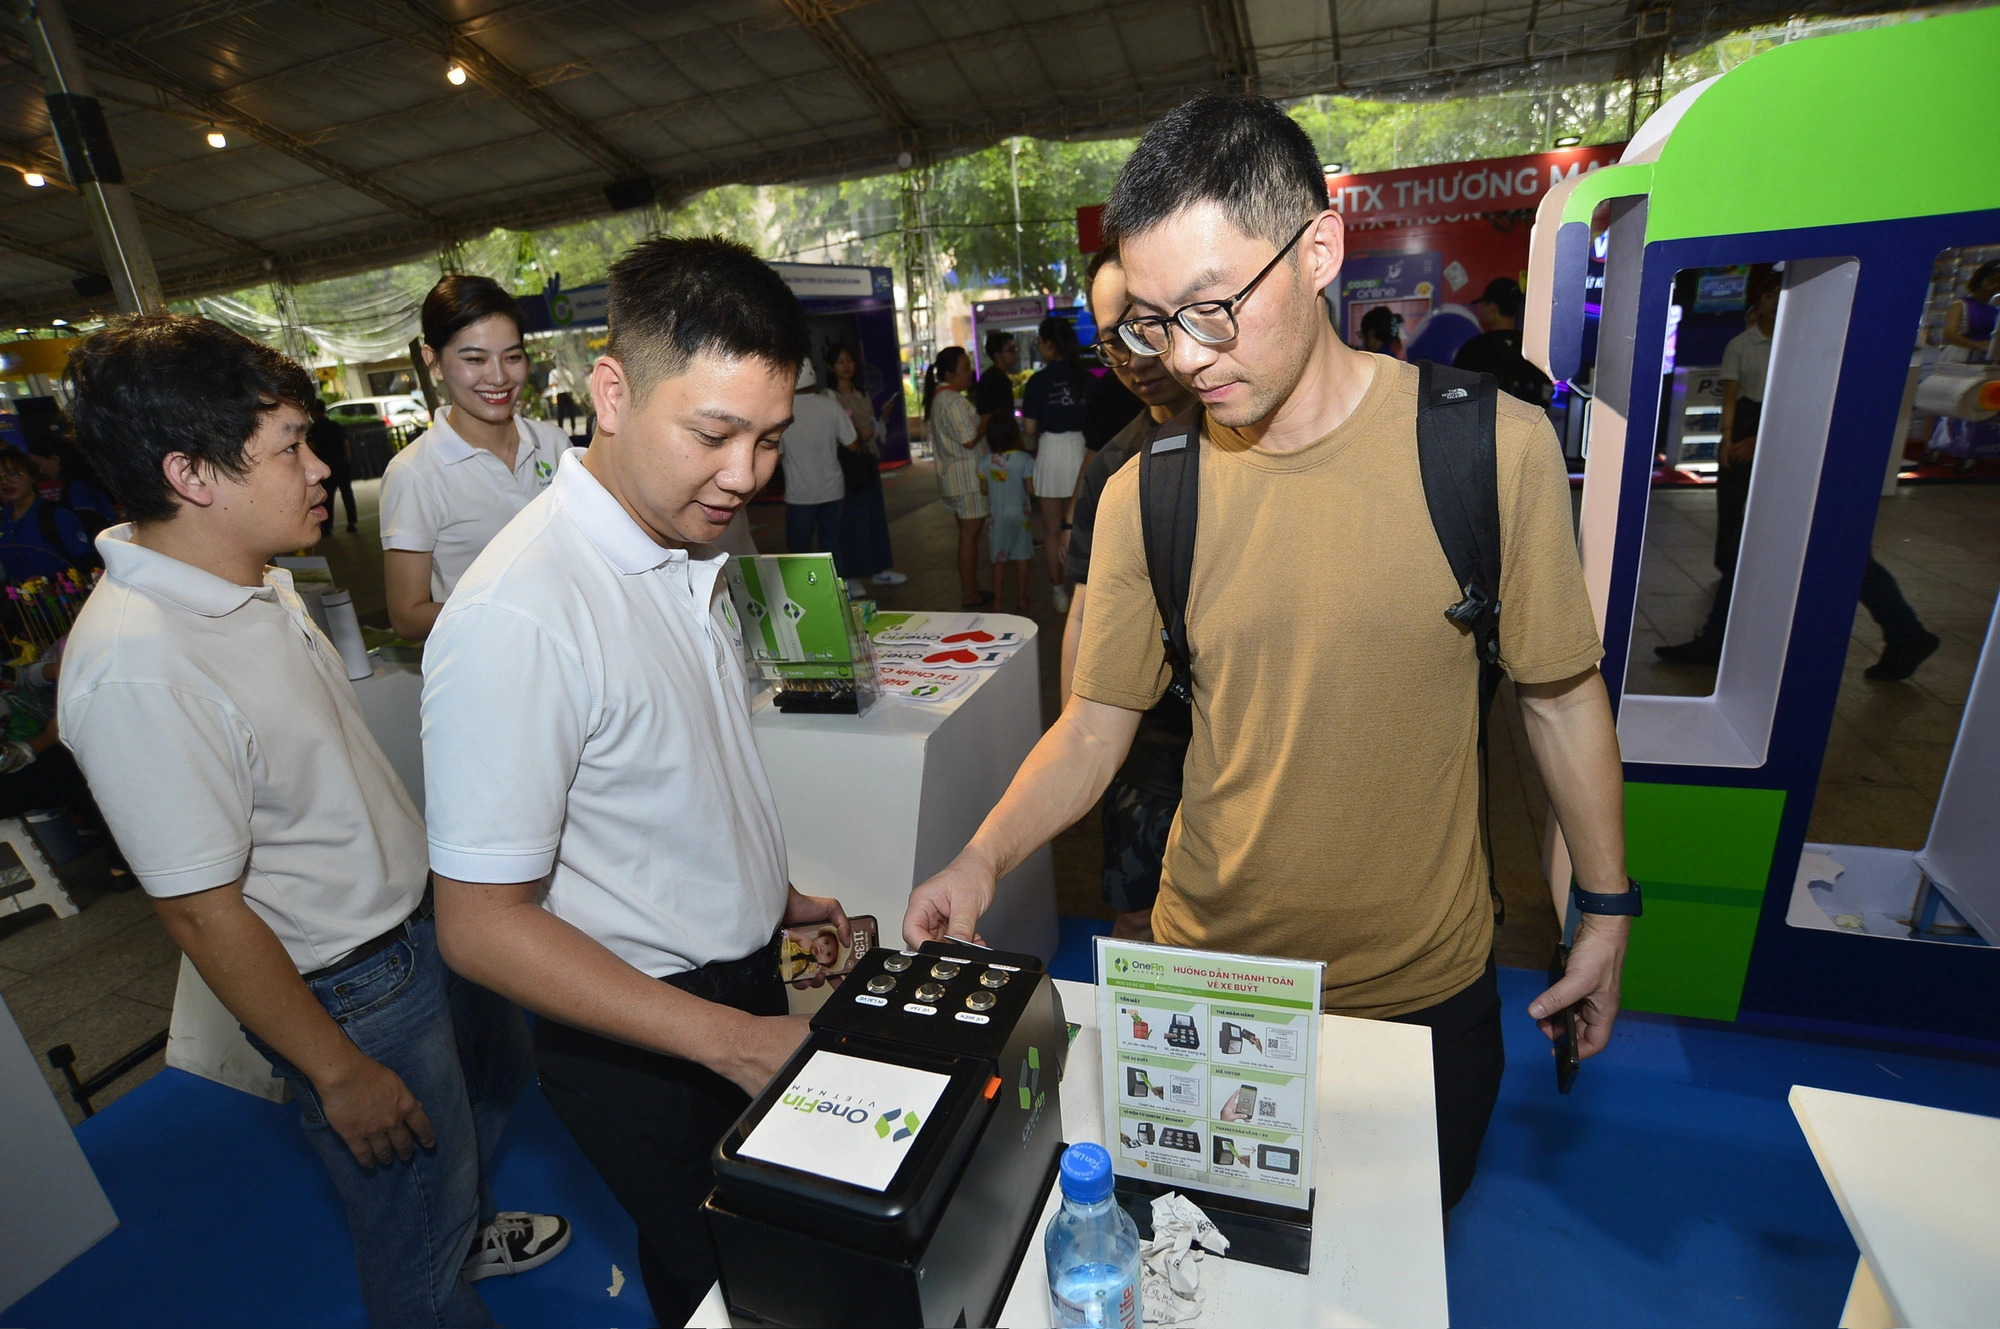 A large number of visitors expressed their satisfaction with time-saving and seamless bank card services provided by most of the pavilions at the festival. Photo: Quang Dinh / Tuoi Tre